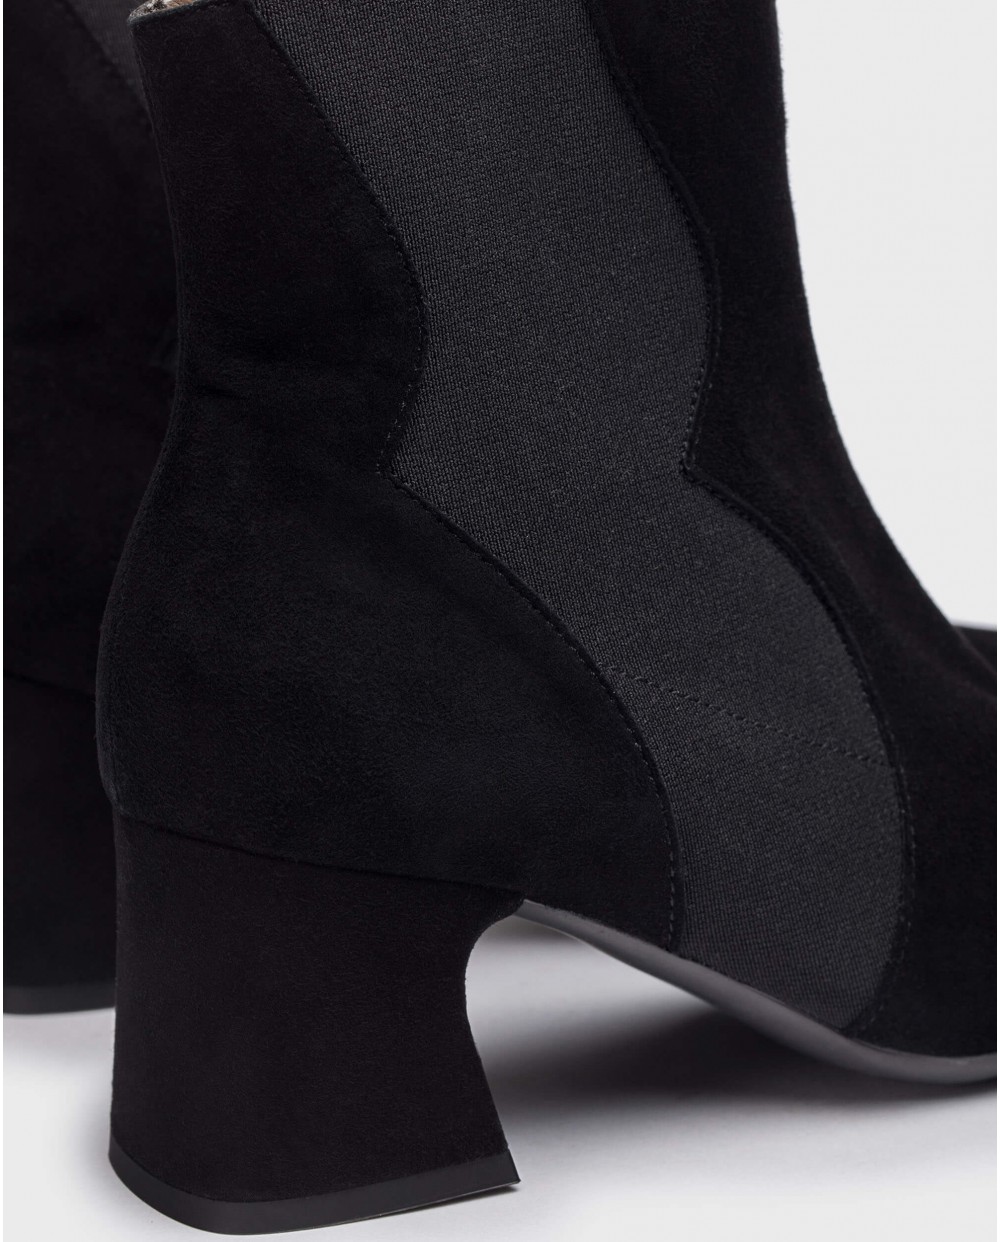 Wonders-Ankle Boots-Black GLIT ankle boot